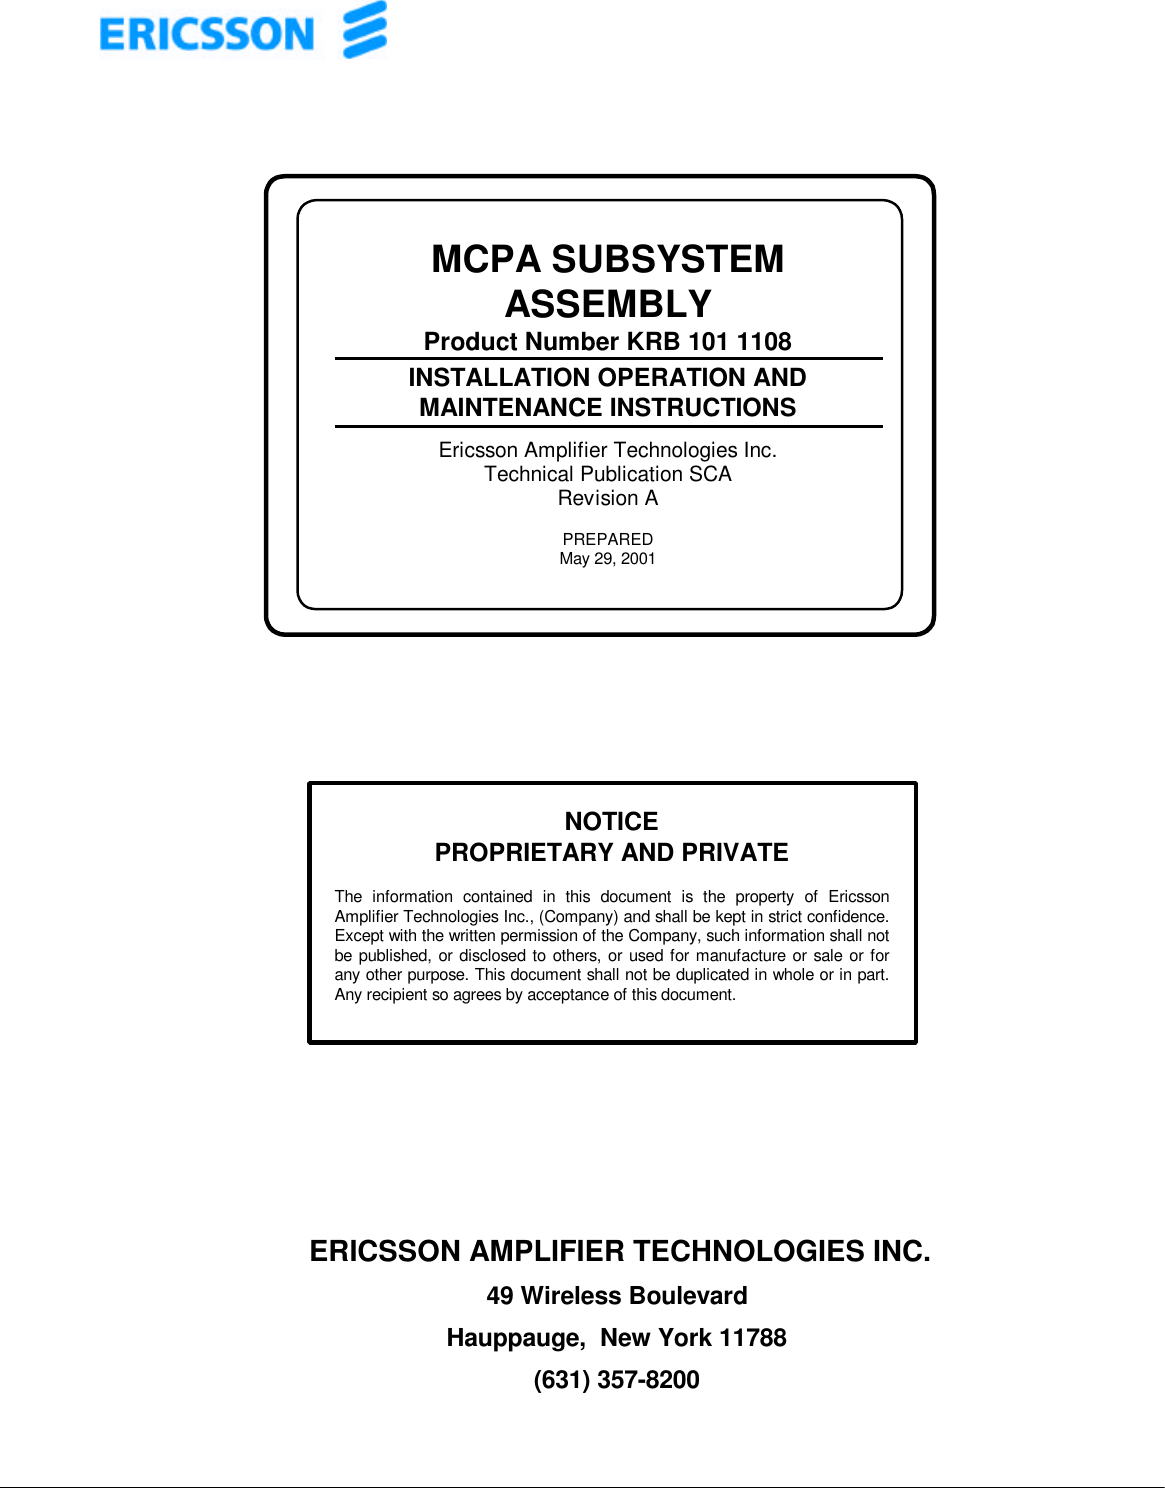 ERICSSON AMPLIFIER TECHNOLOGIES INC.49 Wireless BoulevardHauppauge,  New York 11788(631) 357-8200MCPA SUBSYSTEMASSEMBLYProduct Number KRB 101 1108INSTALLATION OPERATION ANDMAINTENANCE INSTRUCTIONSEricsson Amplifier Technologies Inc.Technical Publication SCARevision APREPAREDMay 29, 2001NOTICEPROPRIETARY AND PRIVATEThe information contained in this document is the property of EricssonAmplifier Technologies Inc., (Company) and shall be kept in strict confidence.Except with the written permission of the Company, such information shall notbe published, or disclosed to others, or used for manufacture or sale or forany other purpose. This document shall not be duplicated in whole or in part.Any recipient so agrees by acceptance of this document.